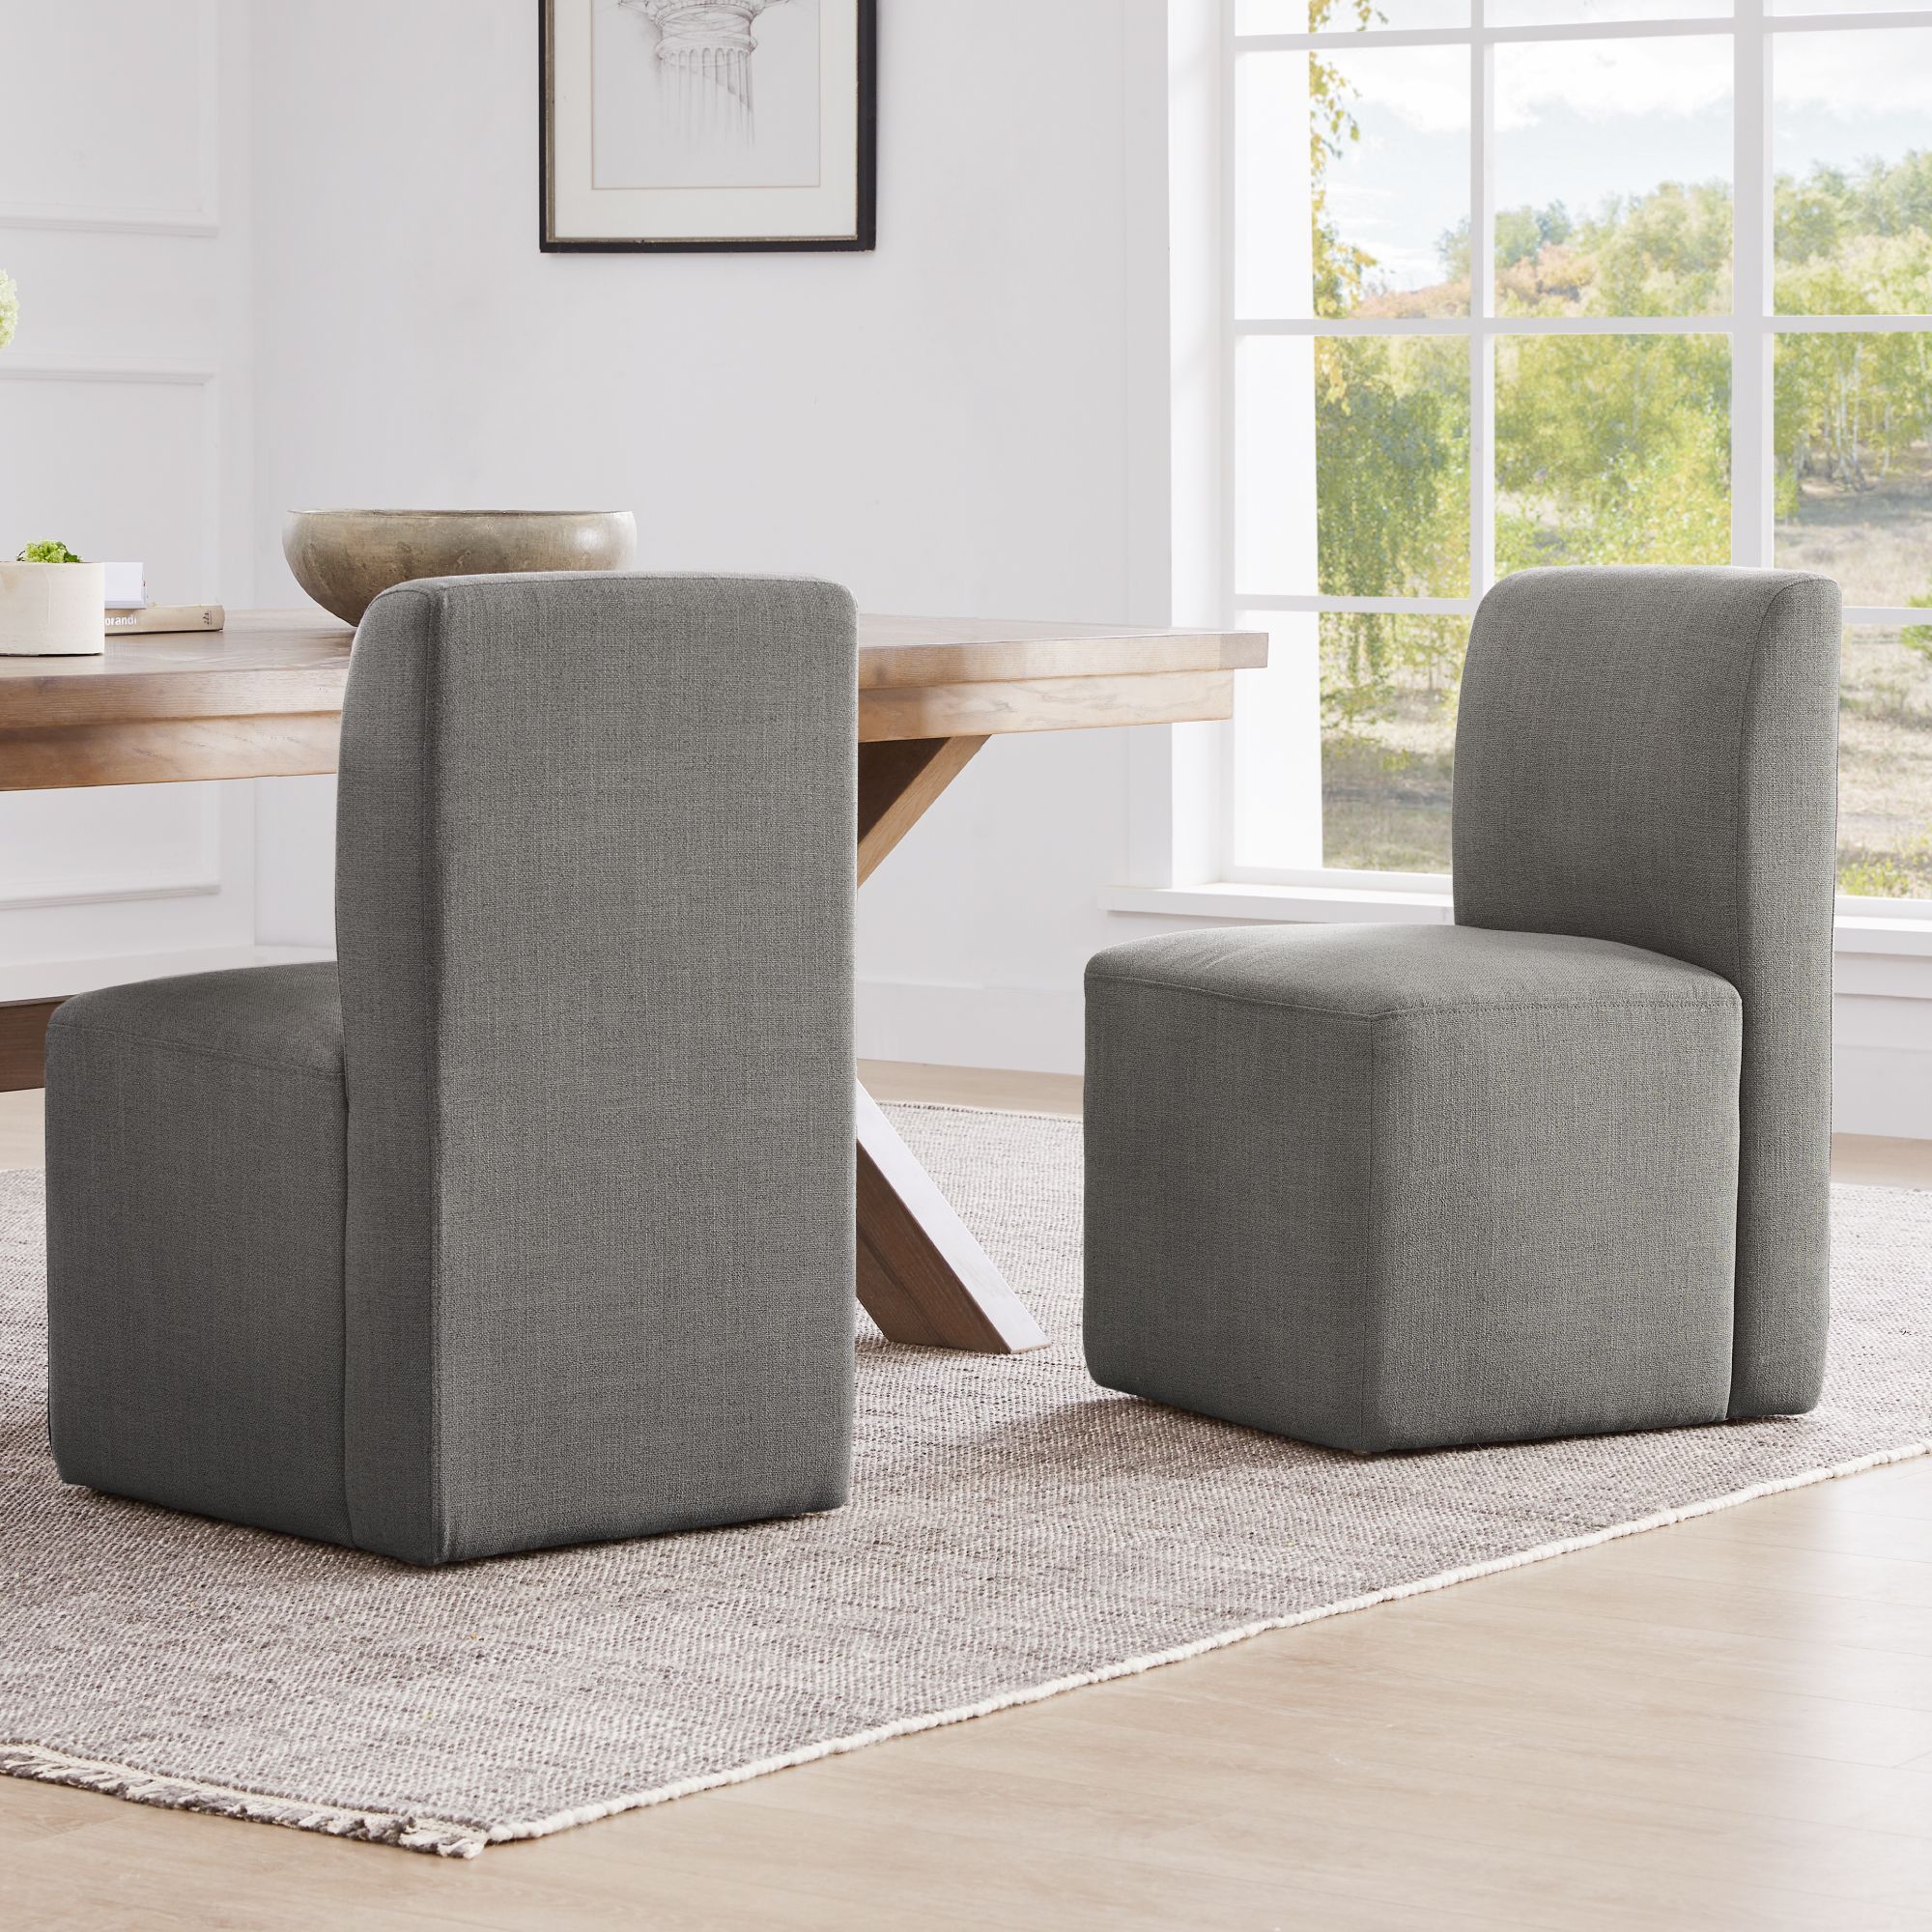 CHITA Upholstered Dining Chairs with Casters Set of 2,Modern Armless Accent Chair with Wheels for... | Walmart (US)